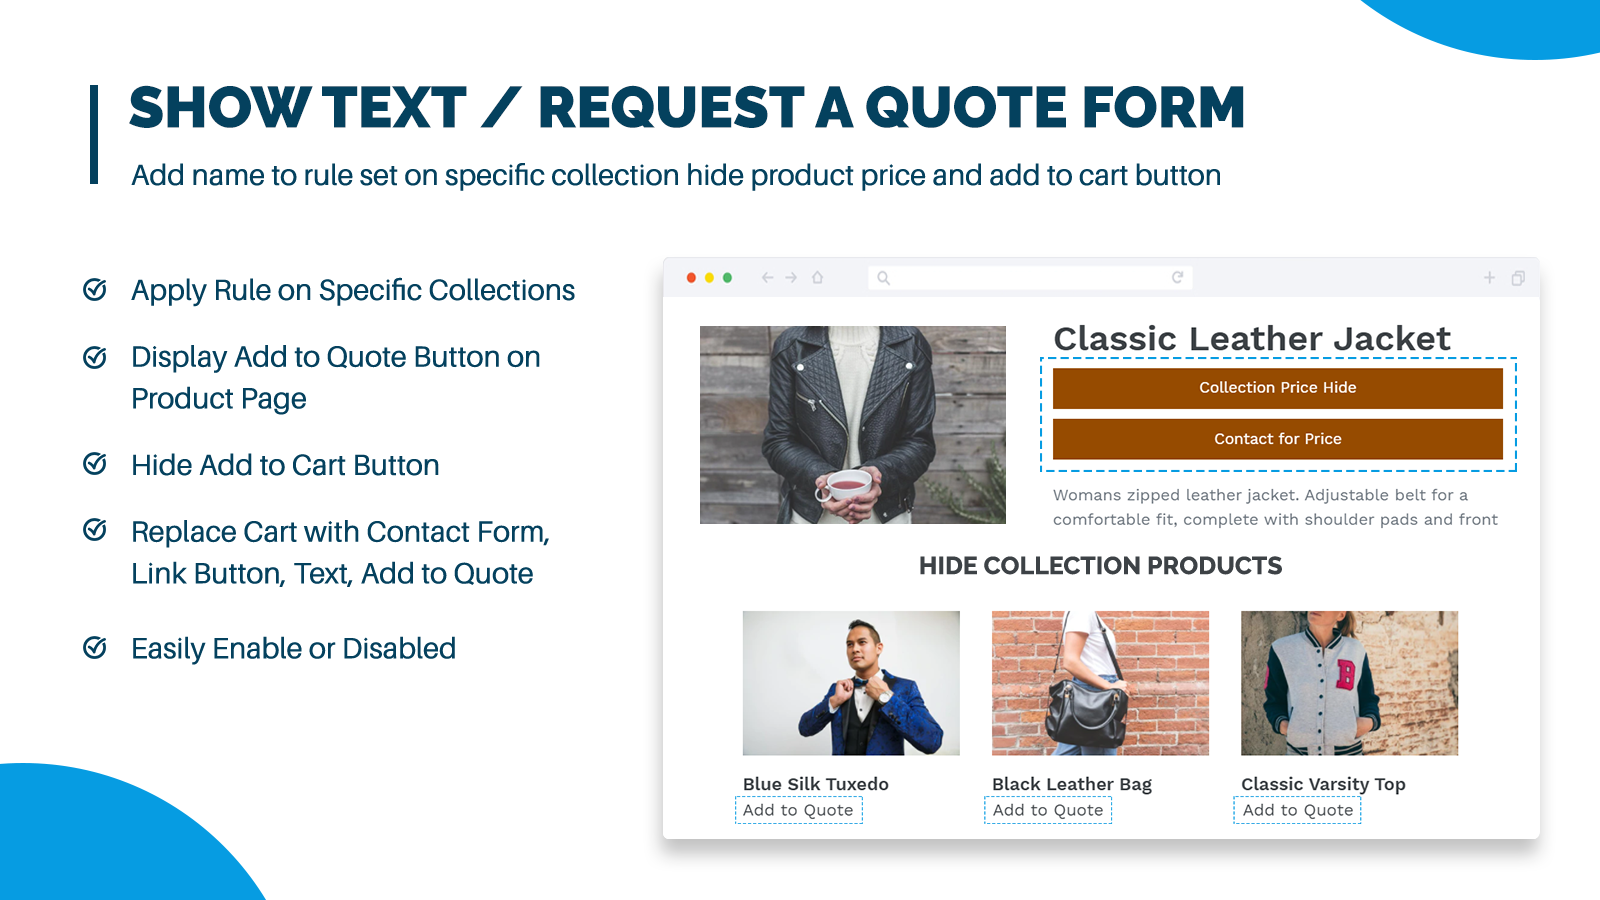 Add a get quote form to products to allow customers request a qu